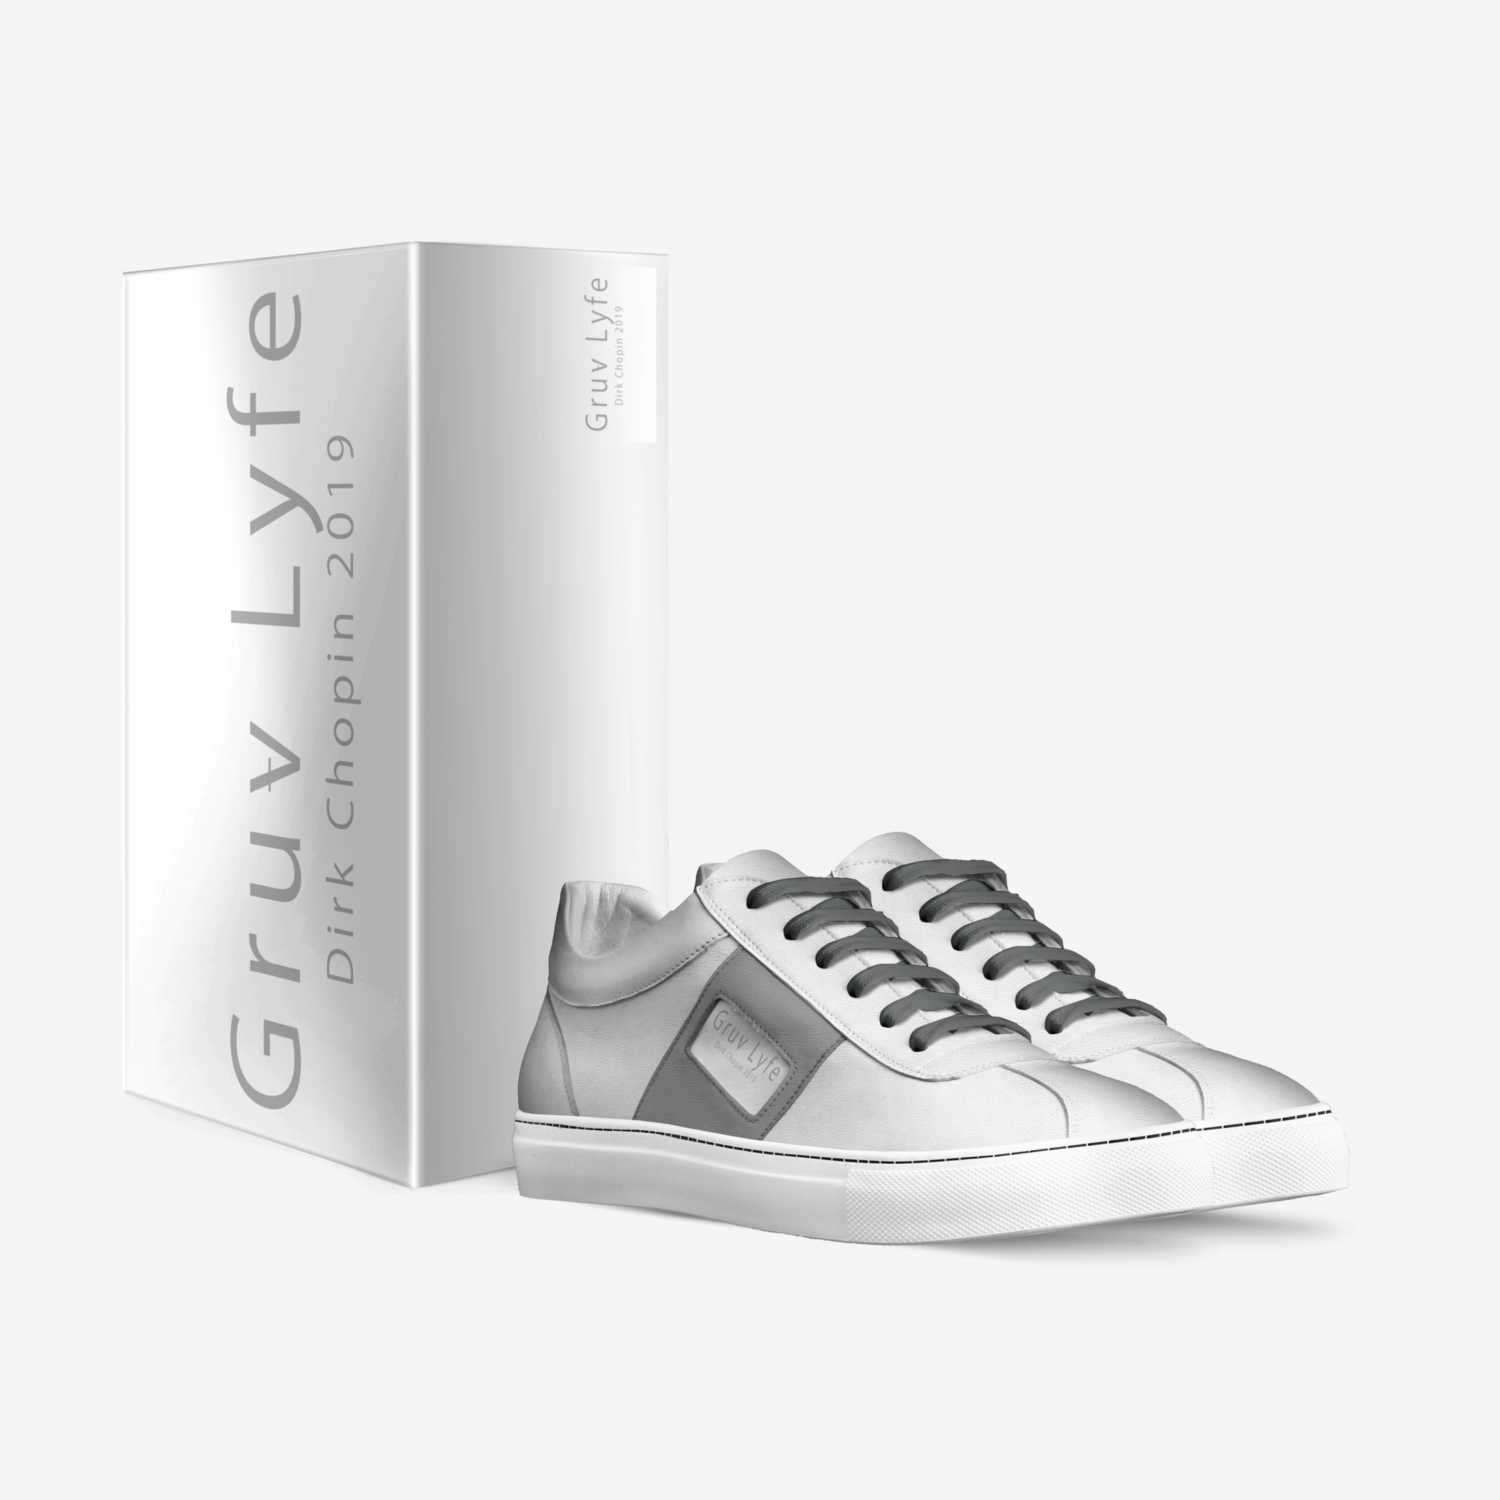 Gruv Lyfe custom made in Italy shoes by Dirk Chopin | Box view